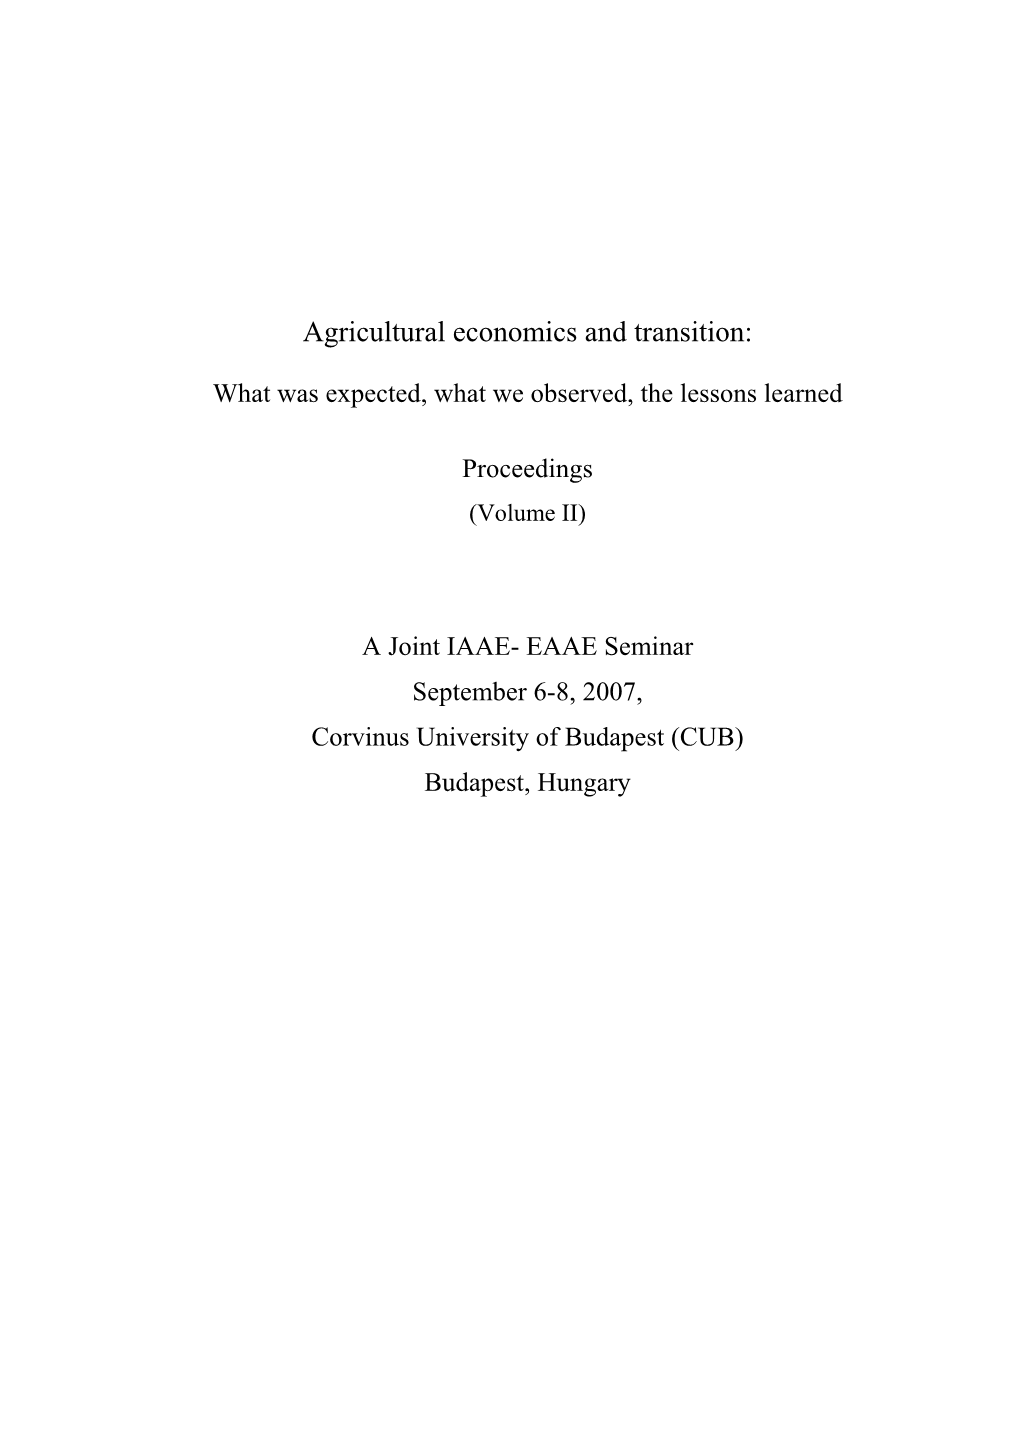 Agricultural Economics and Transition